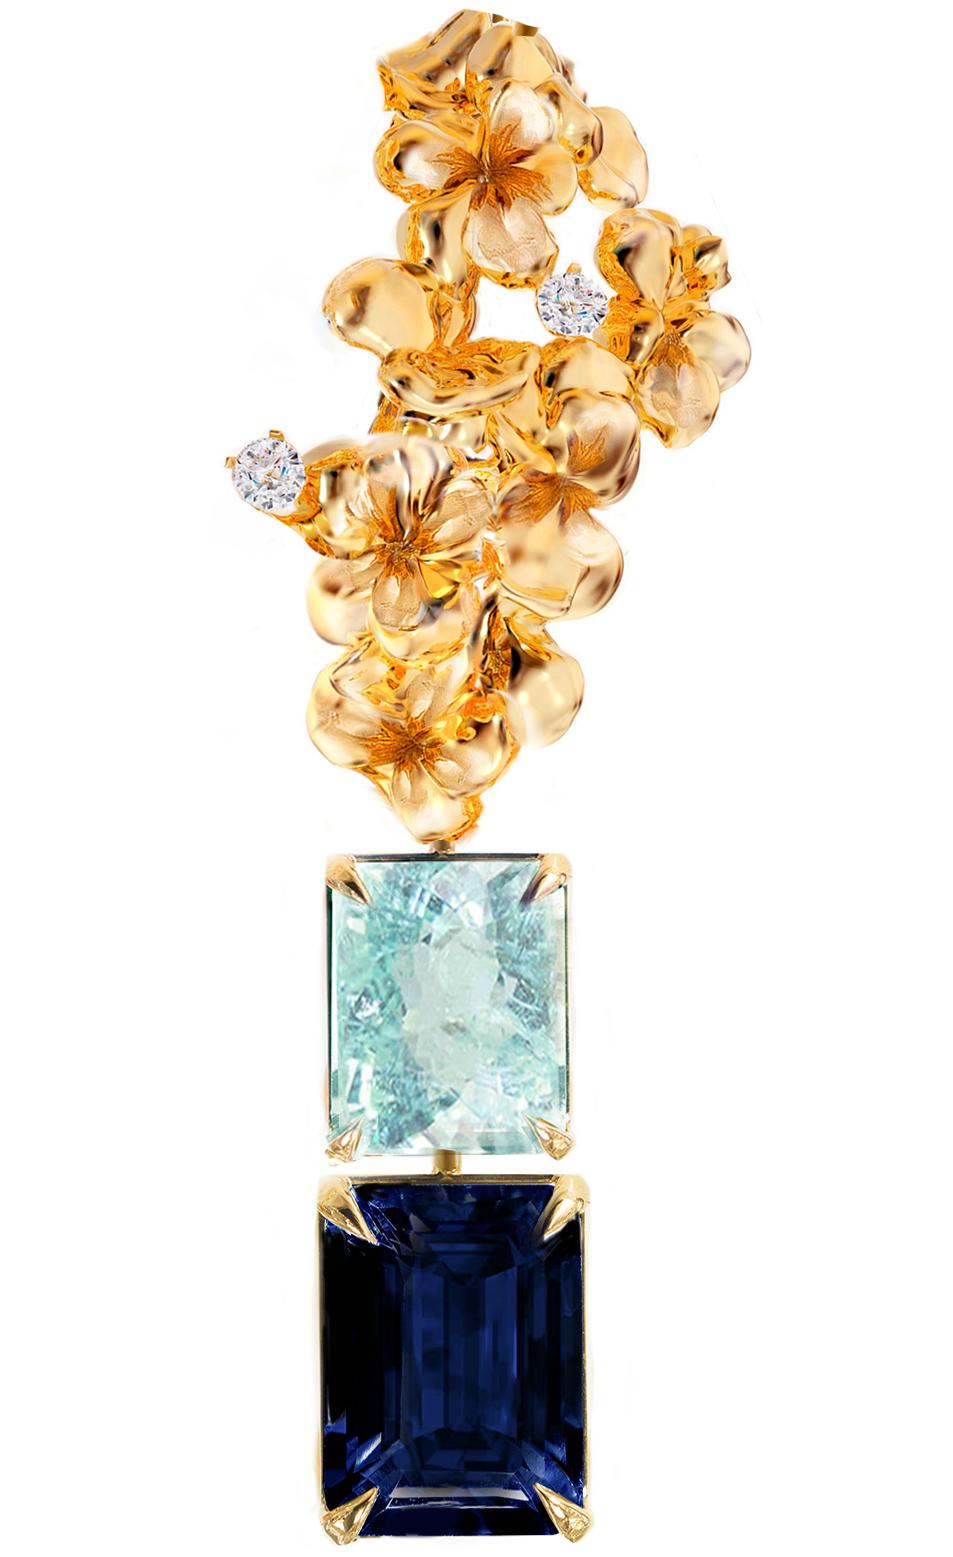 These contemporary 18 karat yellow gold Hortensia cocktail dangle earrings are encrusted with round diamonds and detachable sapphires and paraiba tourmalines. This jewellery collection was featured in Vogue UA review.
One earring is around 4 cm